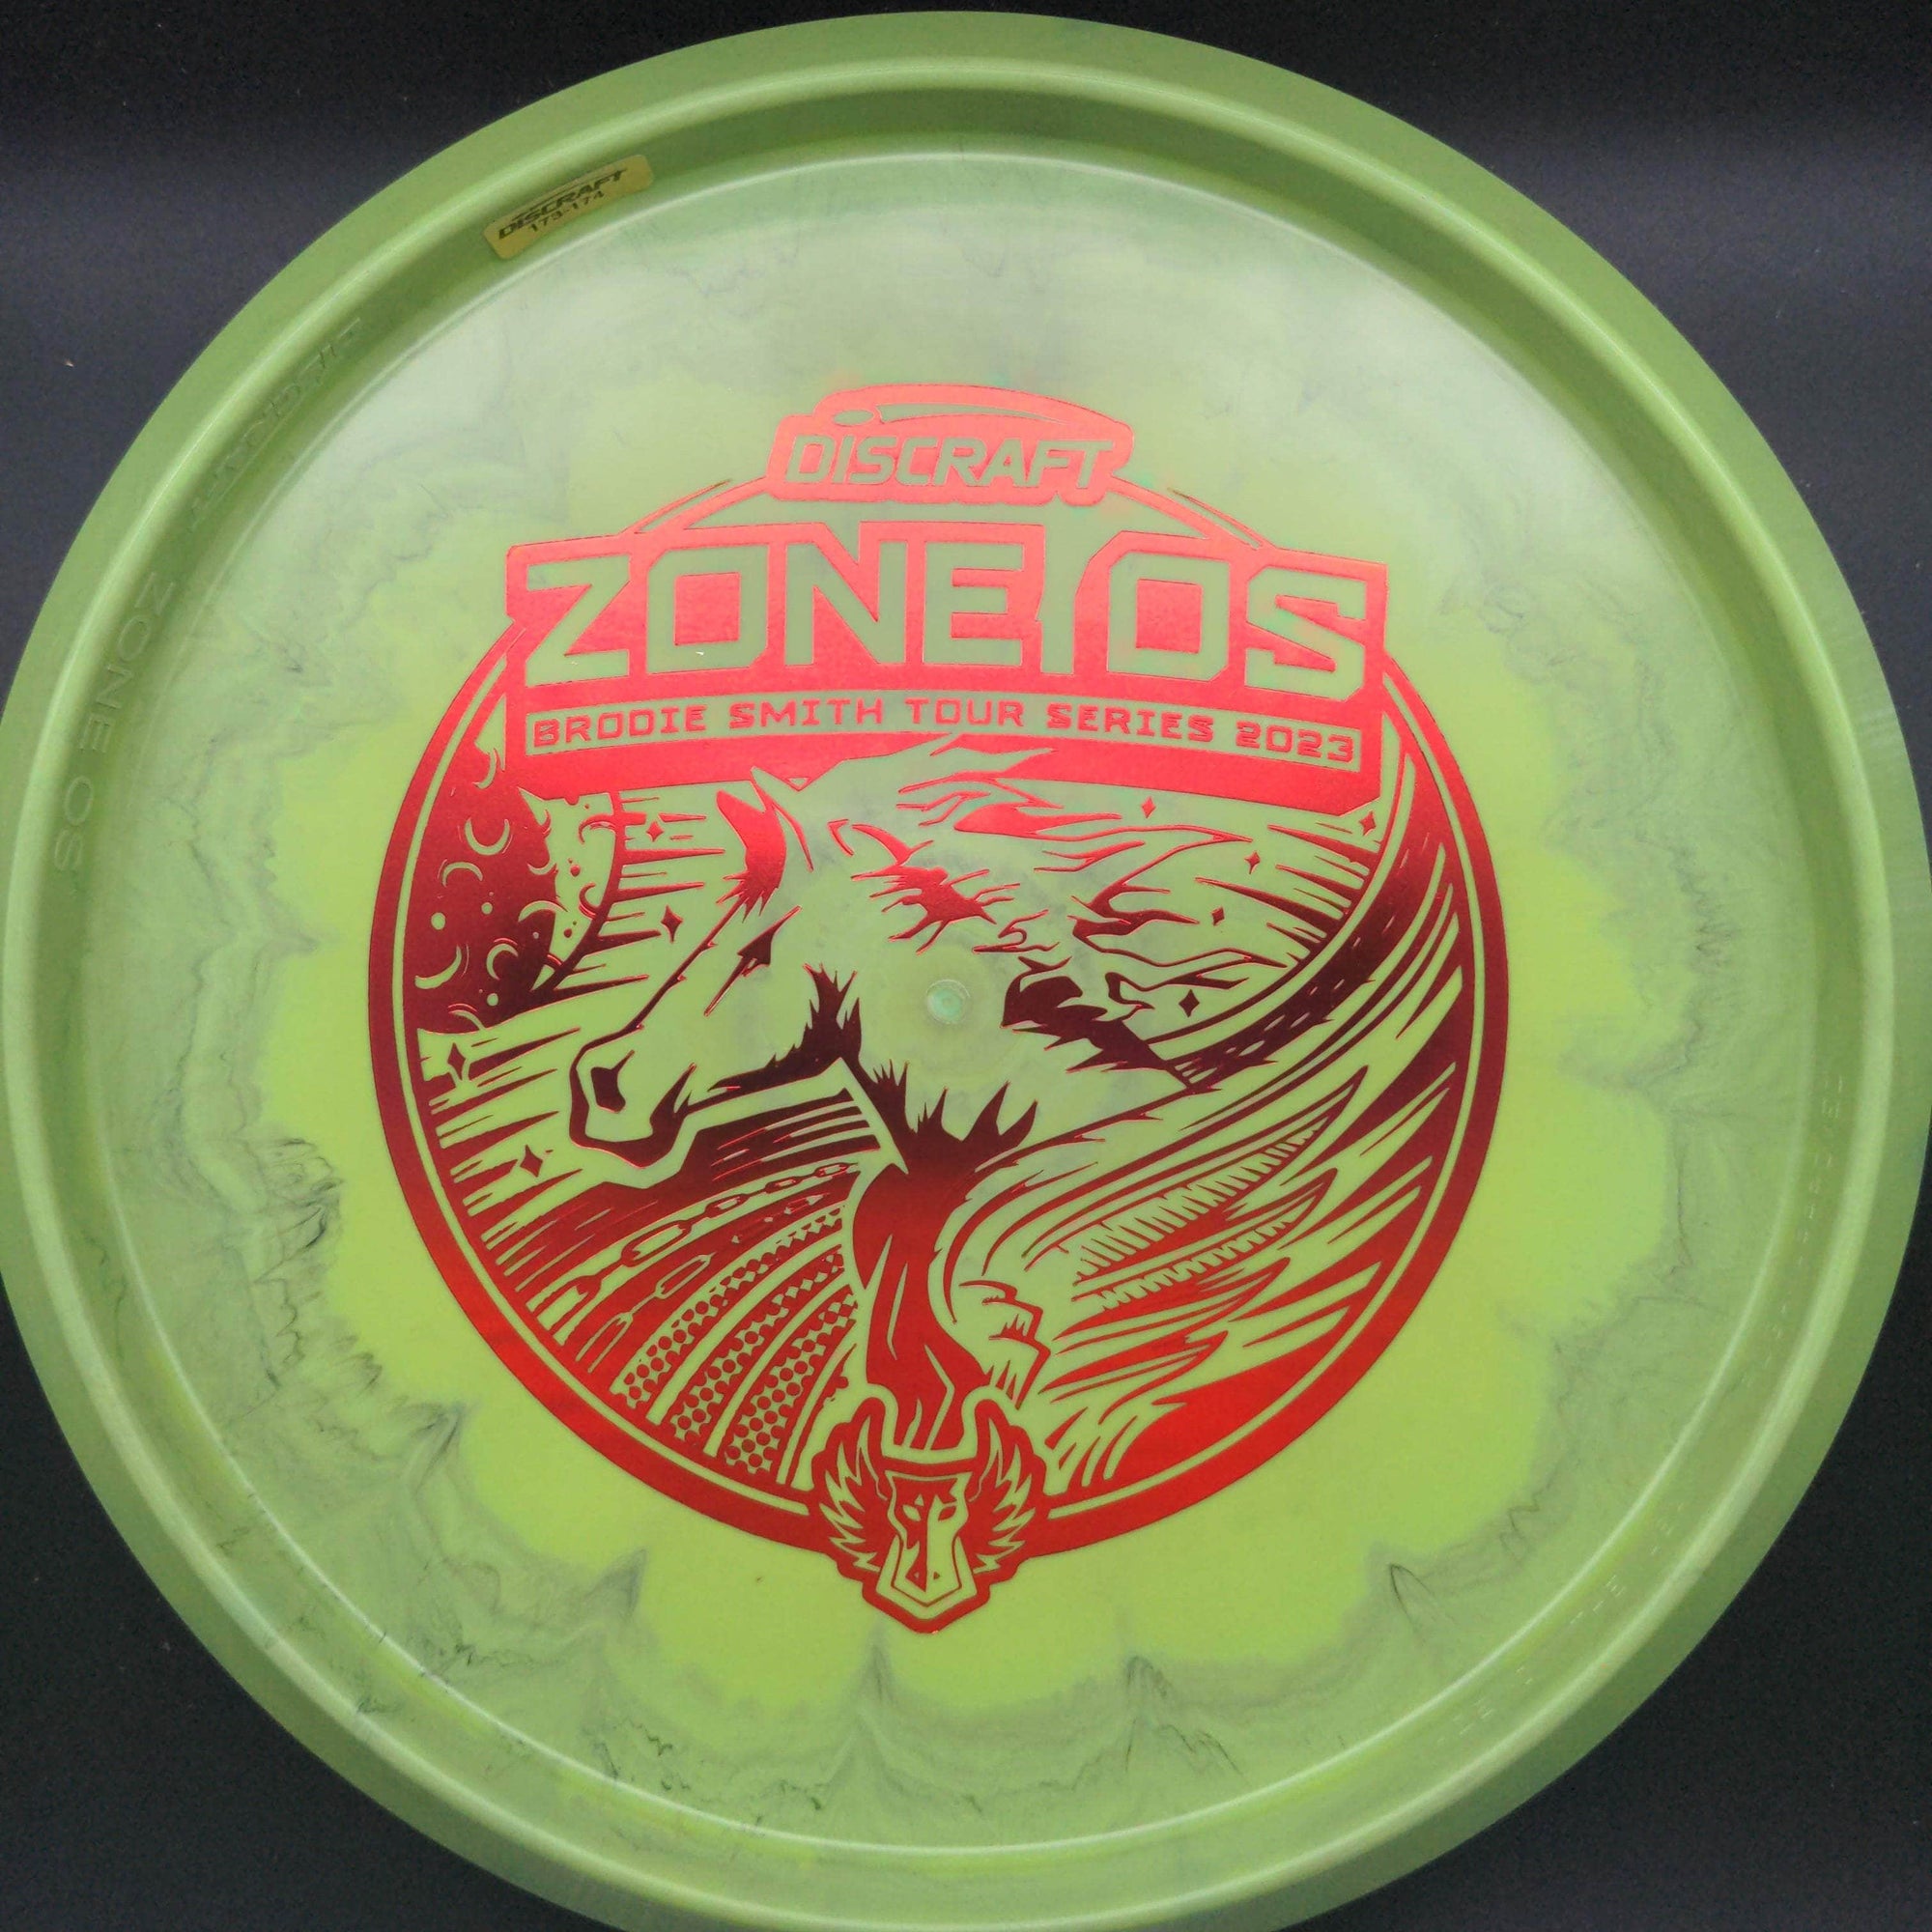 Discraft Mid Range Green Red Stamp 174g Zone OS, Brodie Smith Tour Series, 2023